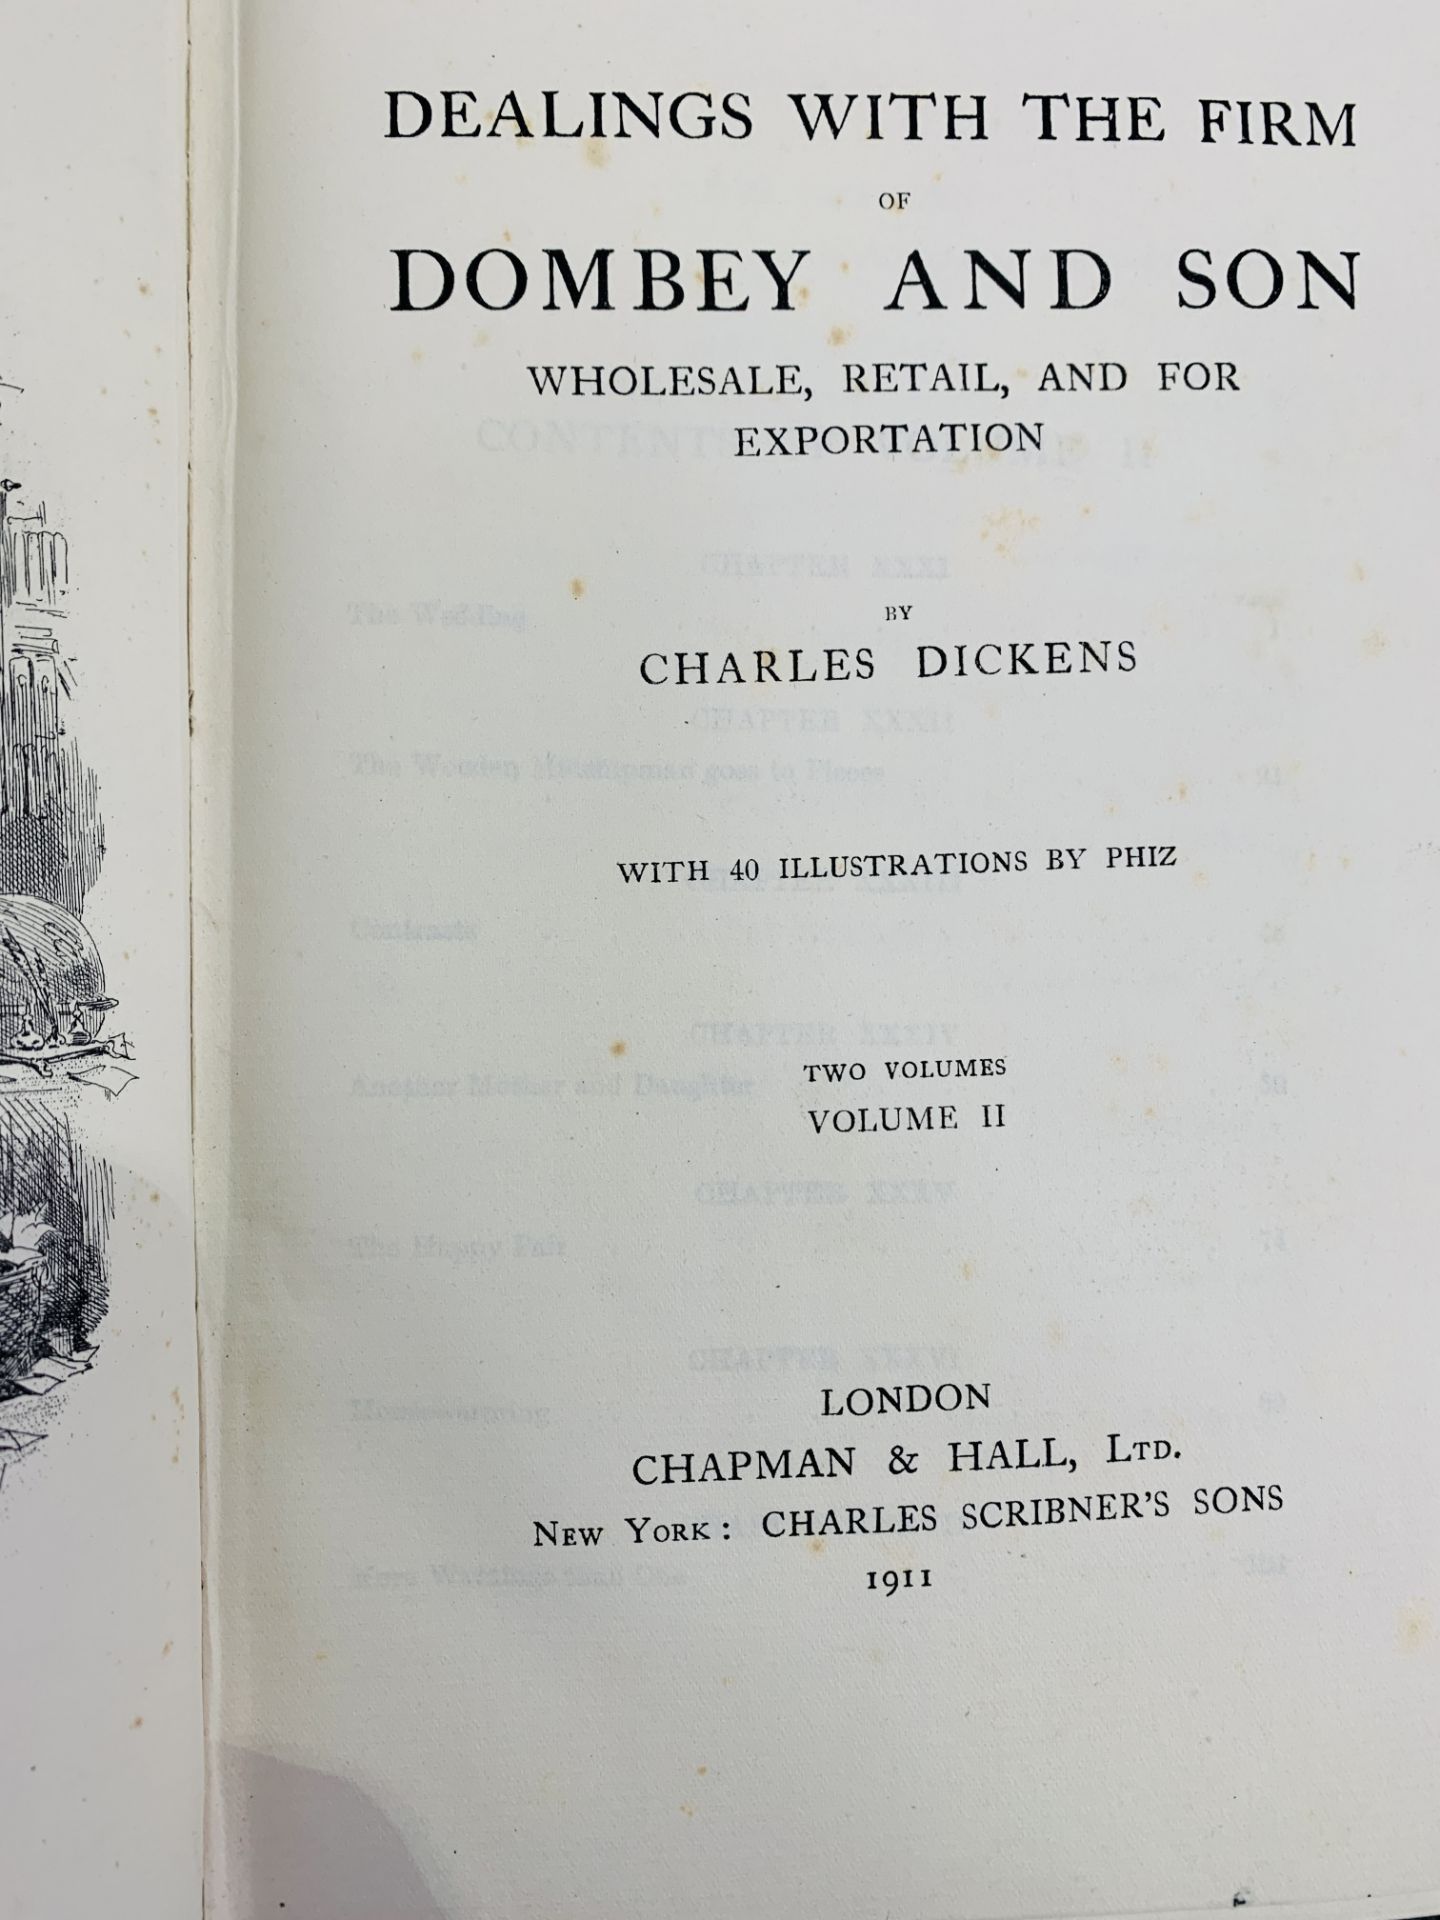 10 Volumes of the Works of Charles Dickens - Image 4 of 4